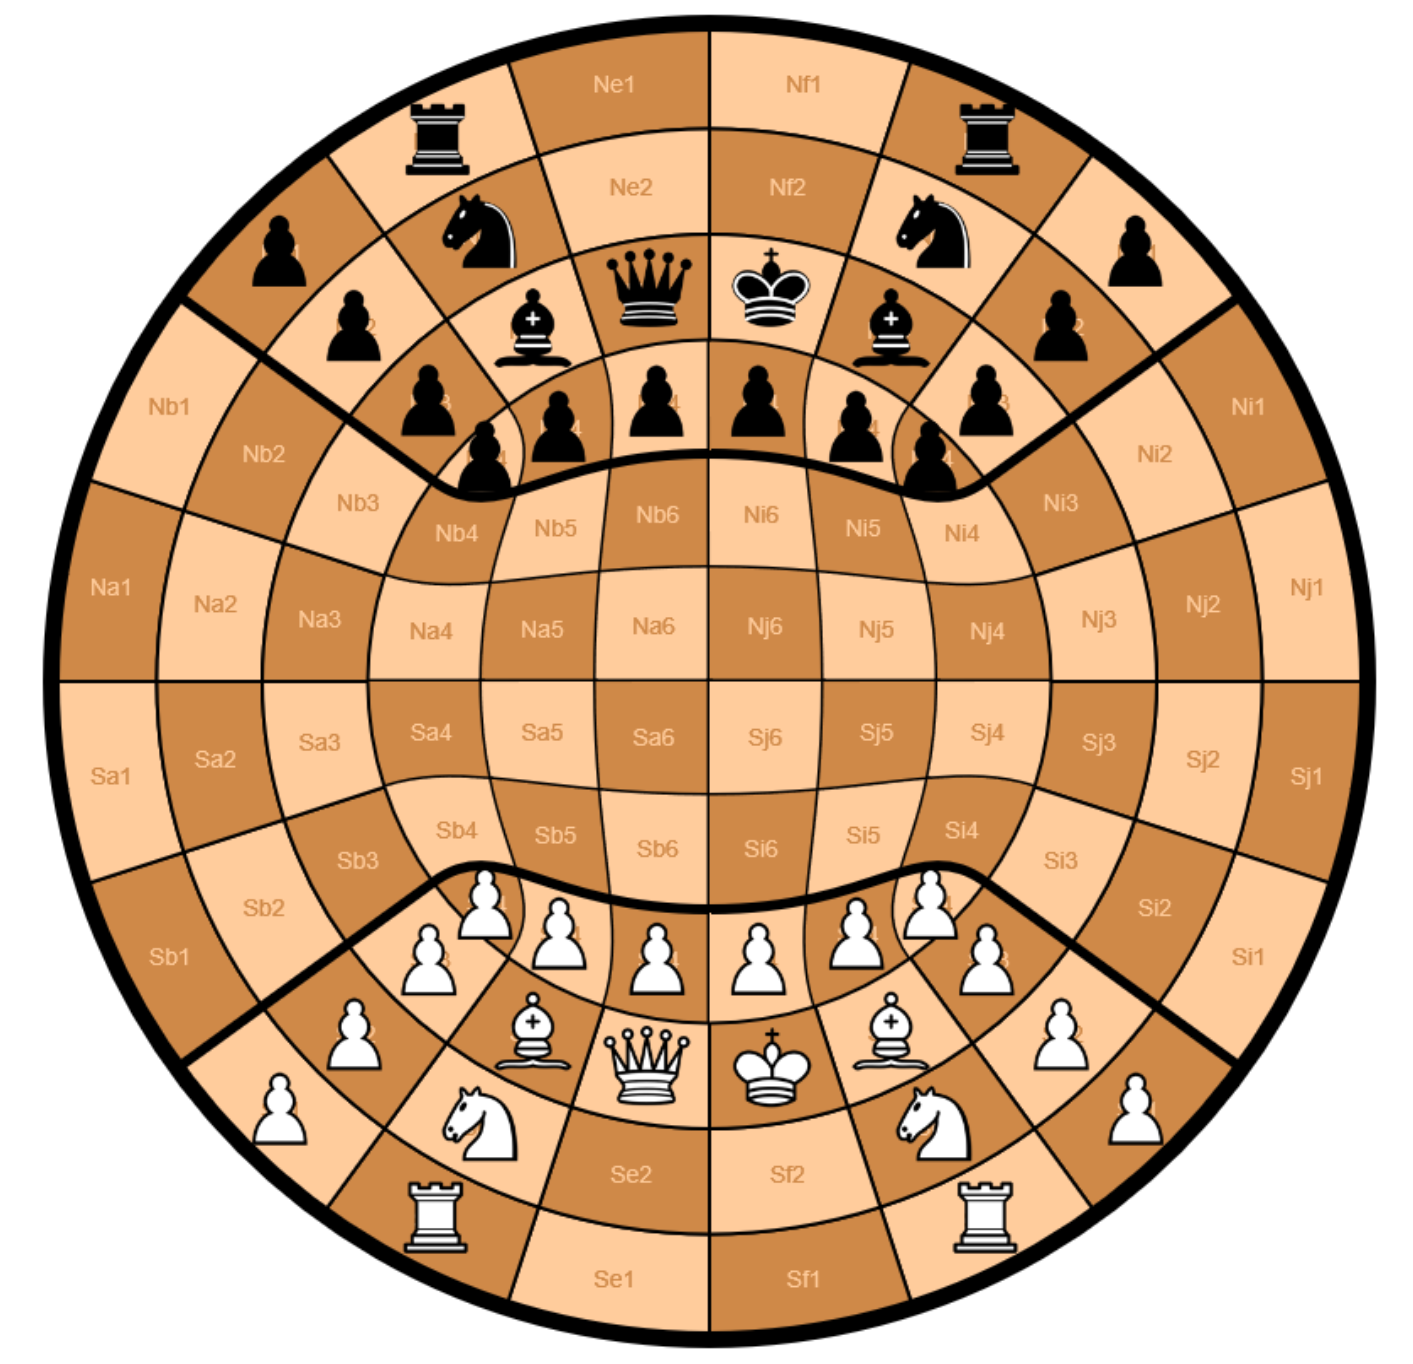 Chess Variant Ideas: Grand Chess, Chess on a really big board